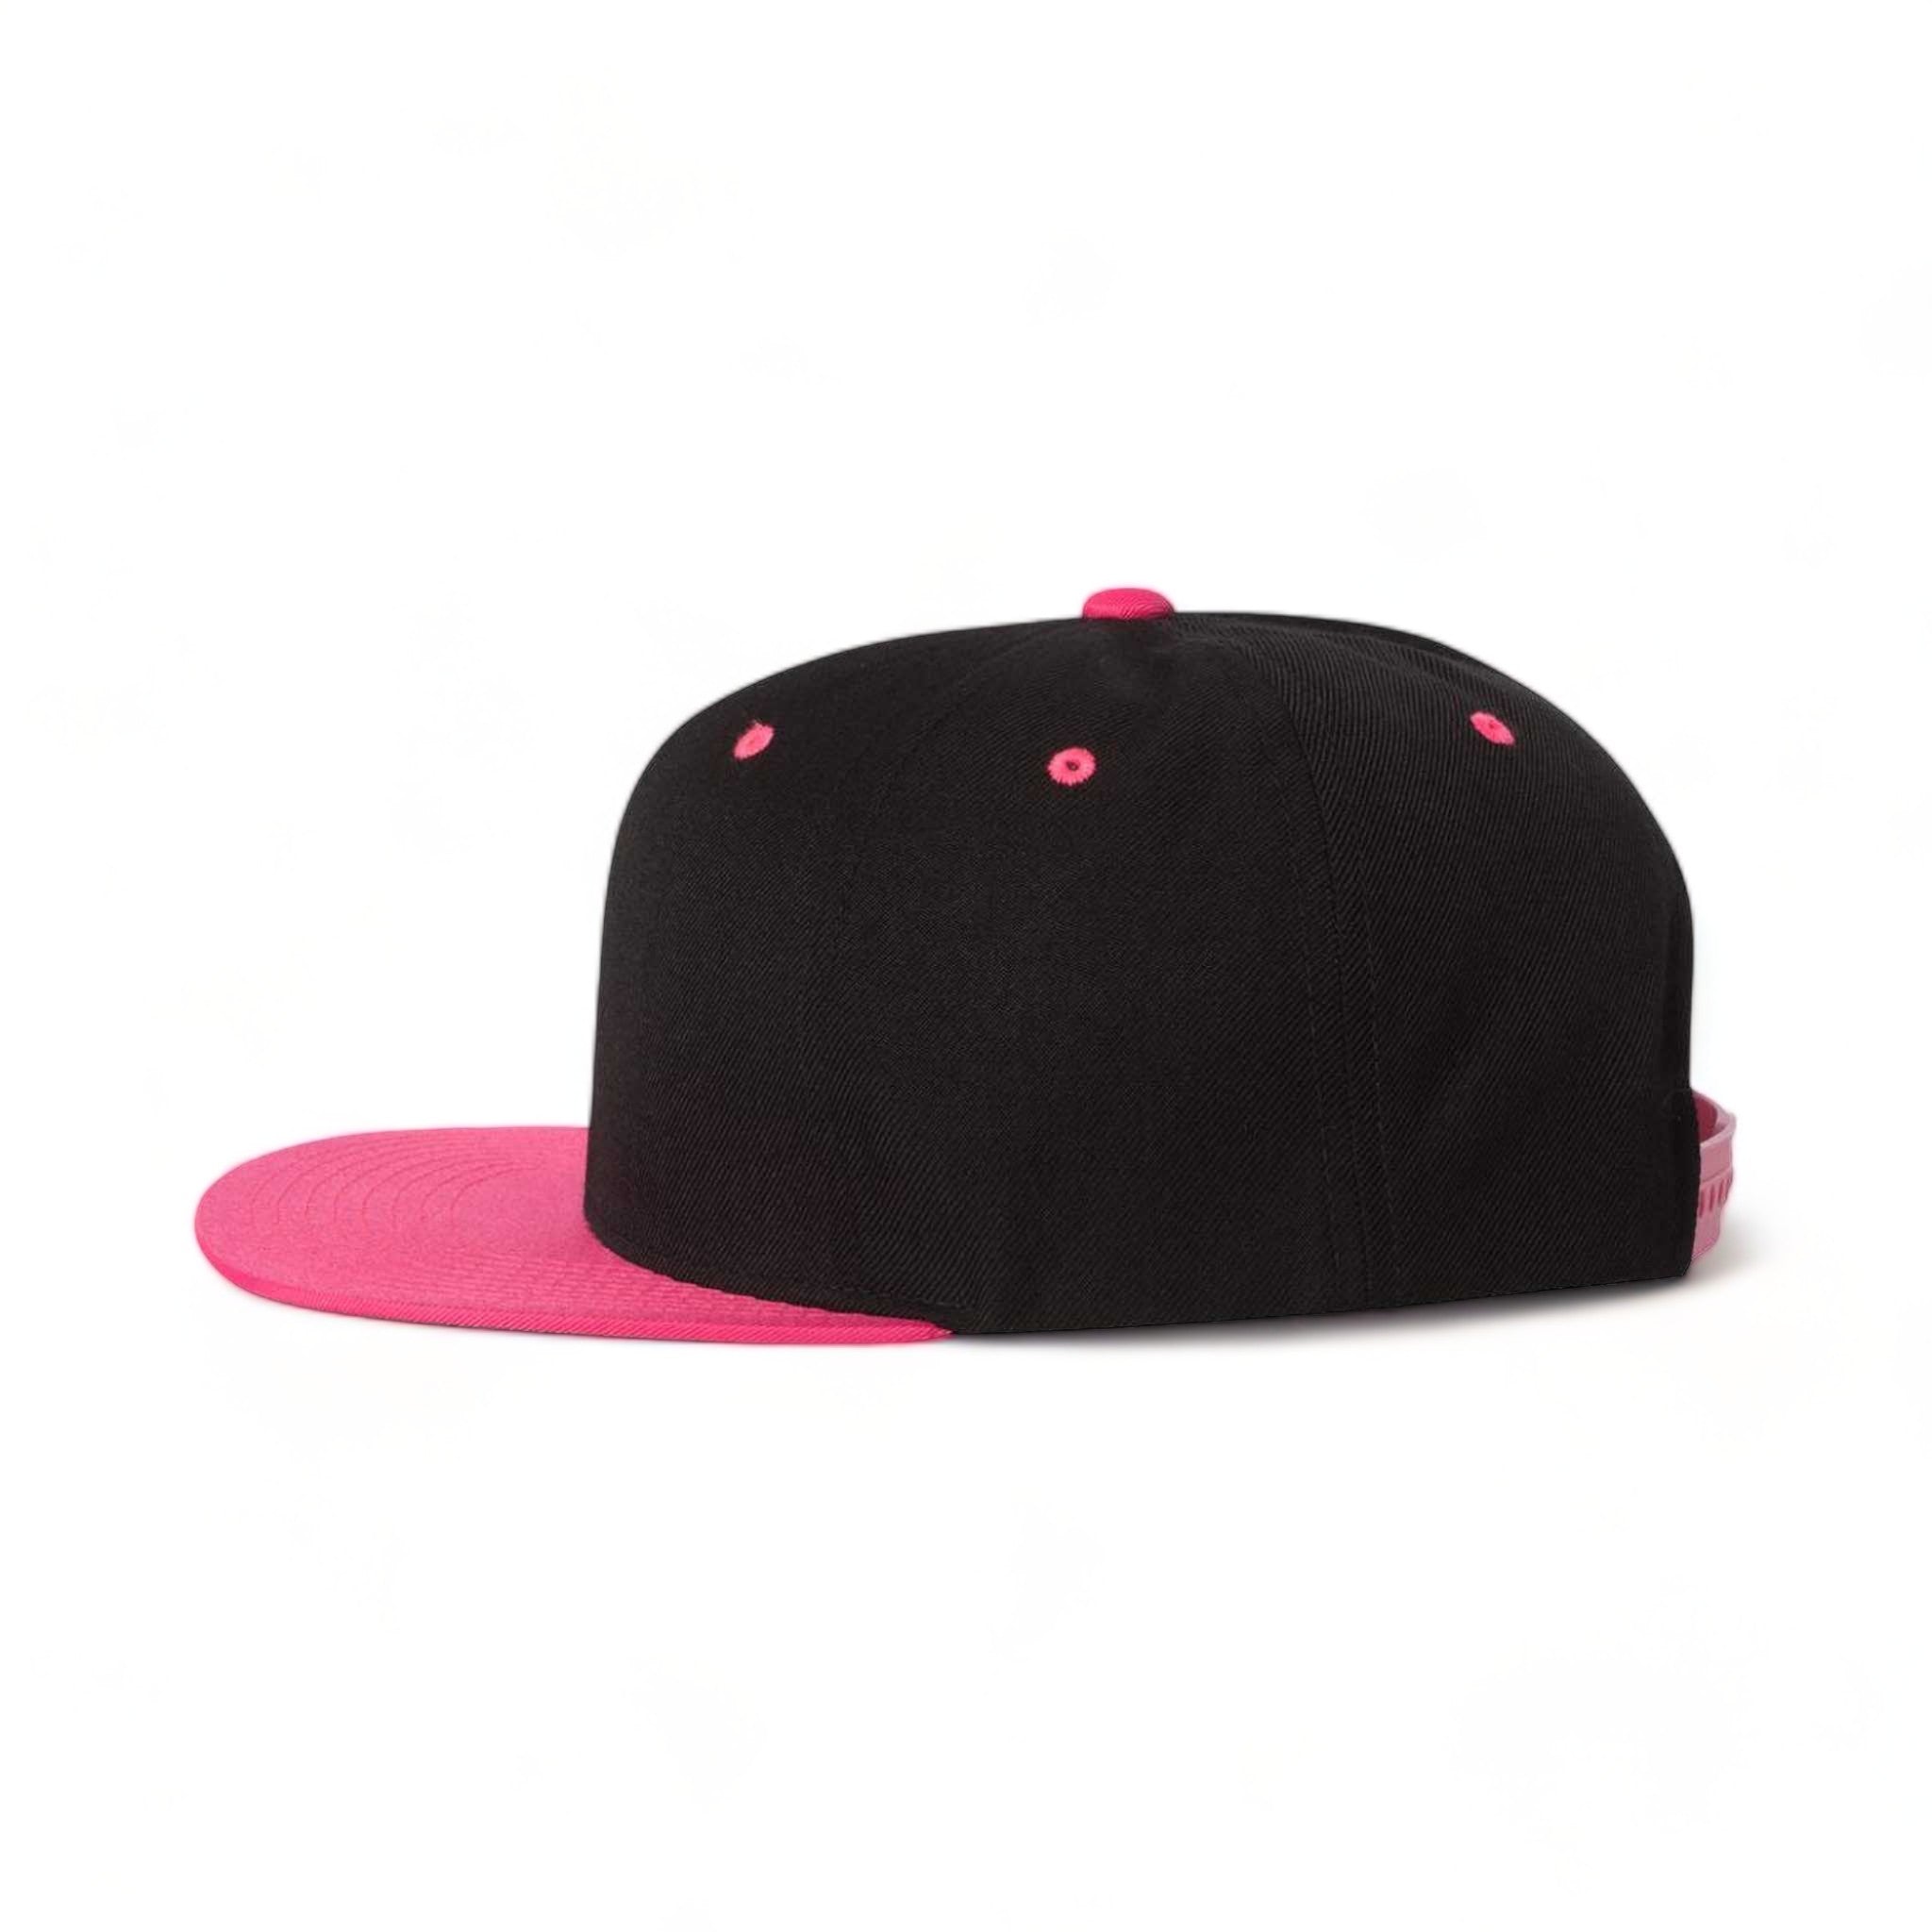 Side view of YP Classics 6089M custom hat in black and neon pink